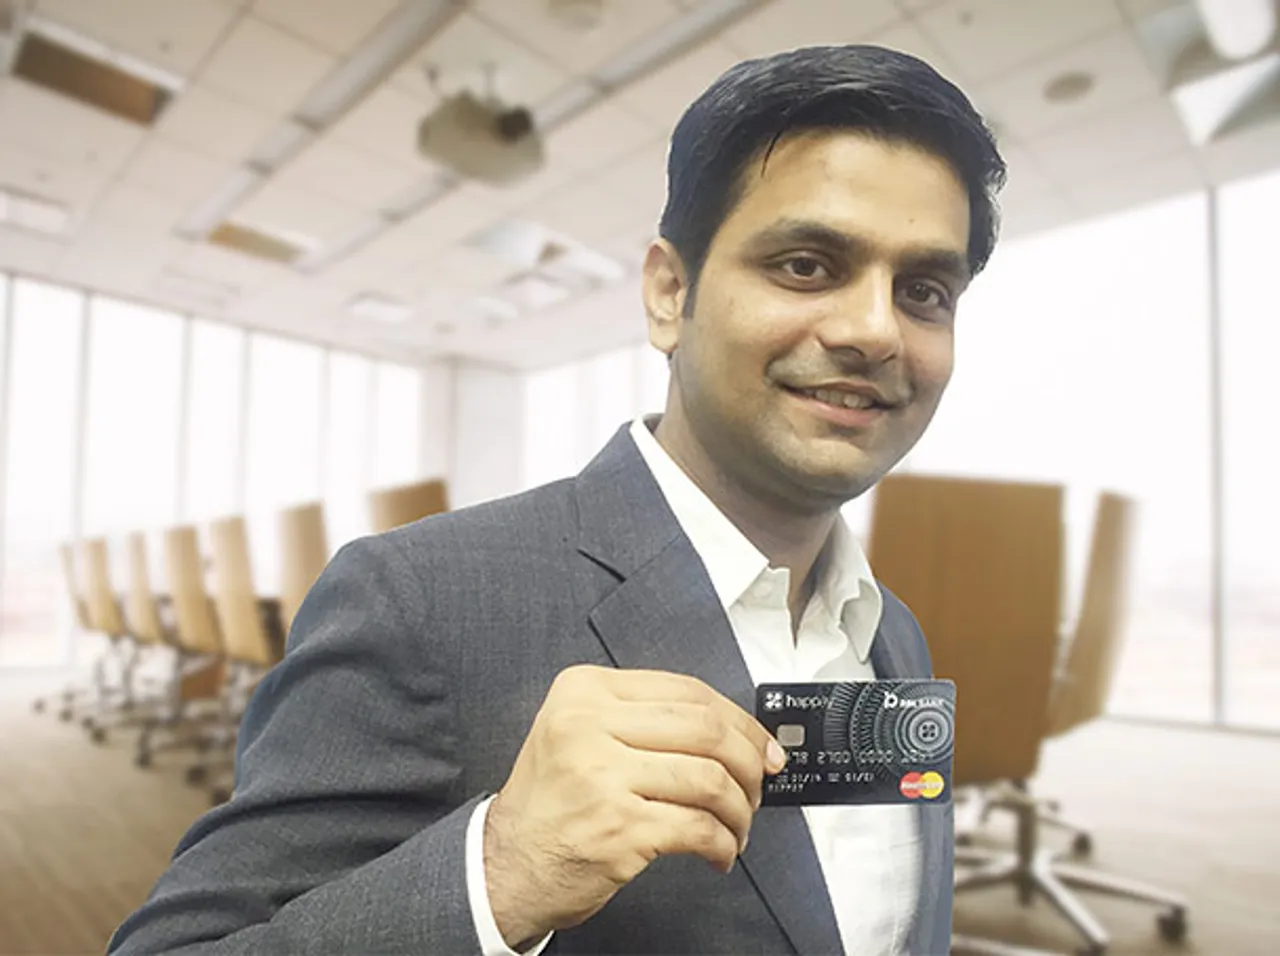 Happay and HDFC Bank Jon Hands for Travel Solutions for Indian SMEs